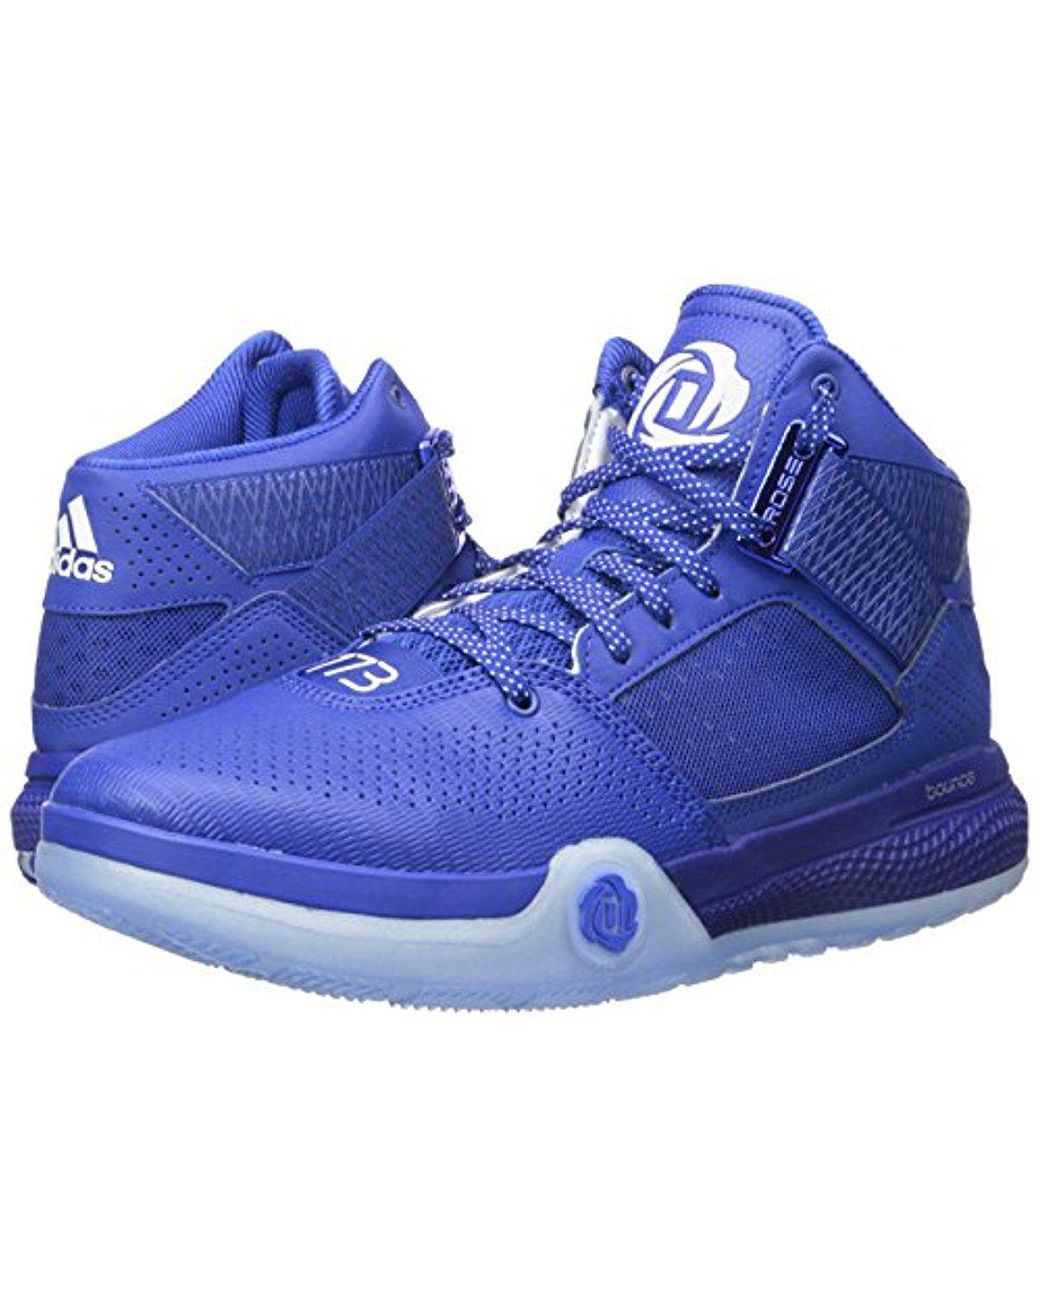 adidas Performance D Rose 773 Iv Basketball Shoe in Blue for |